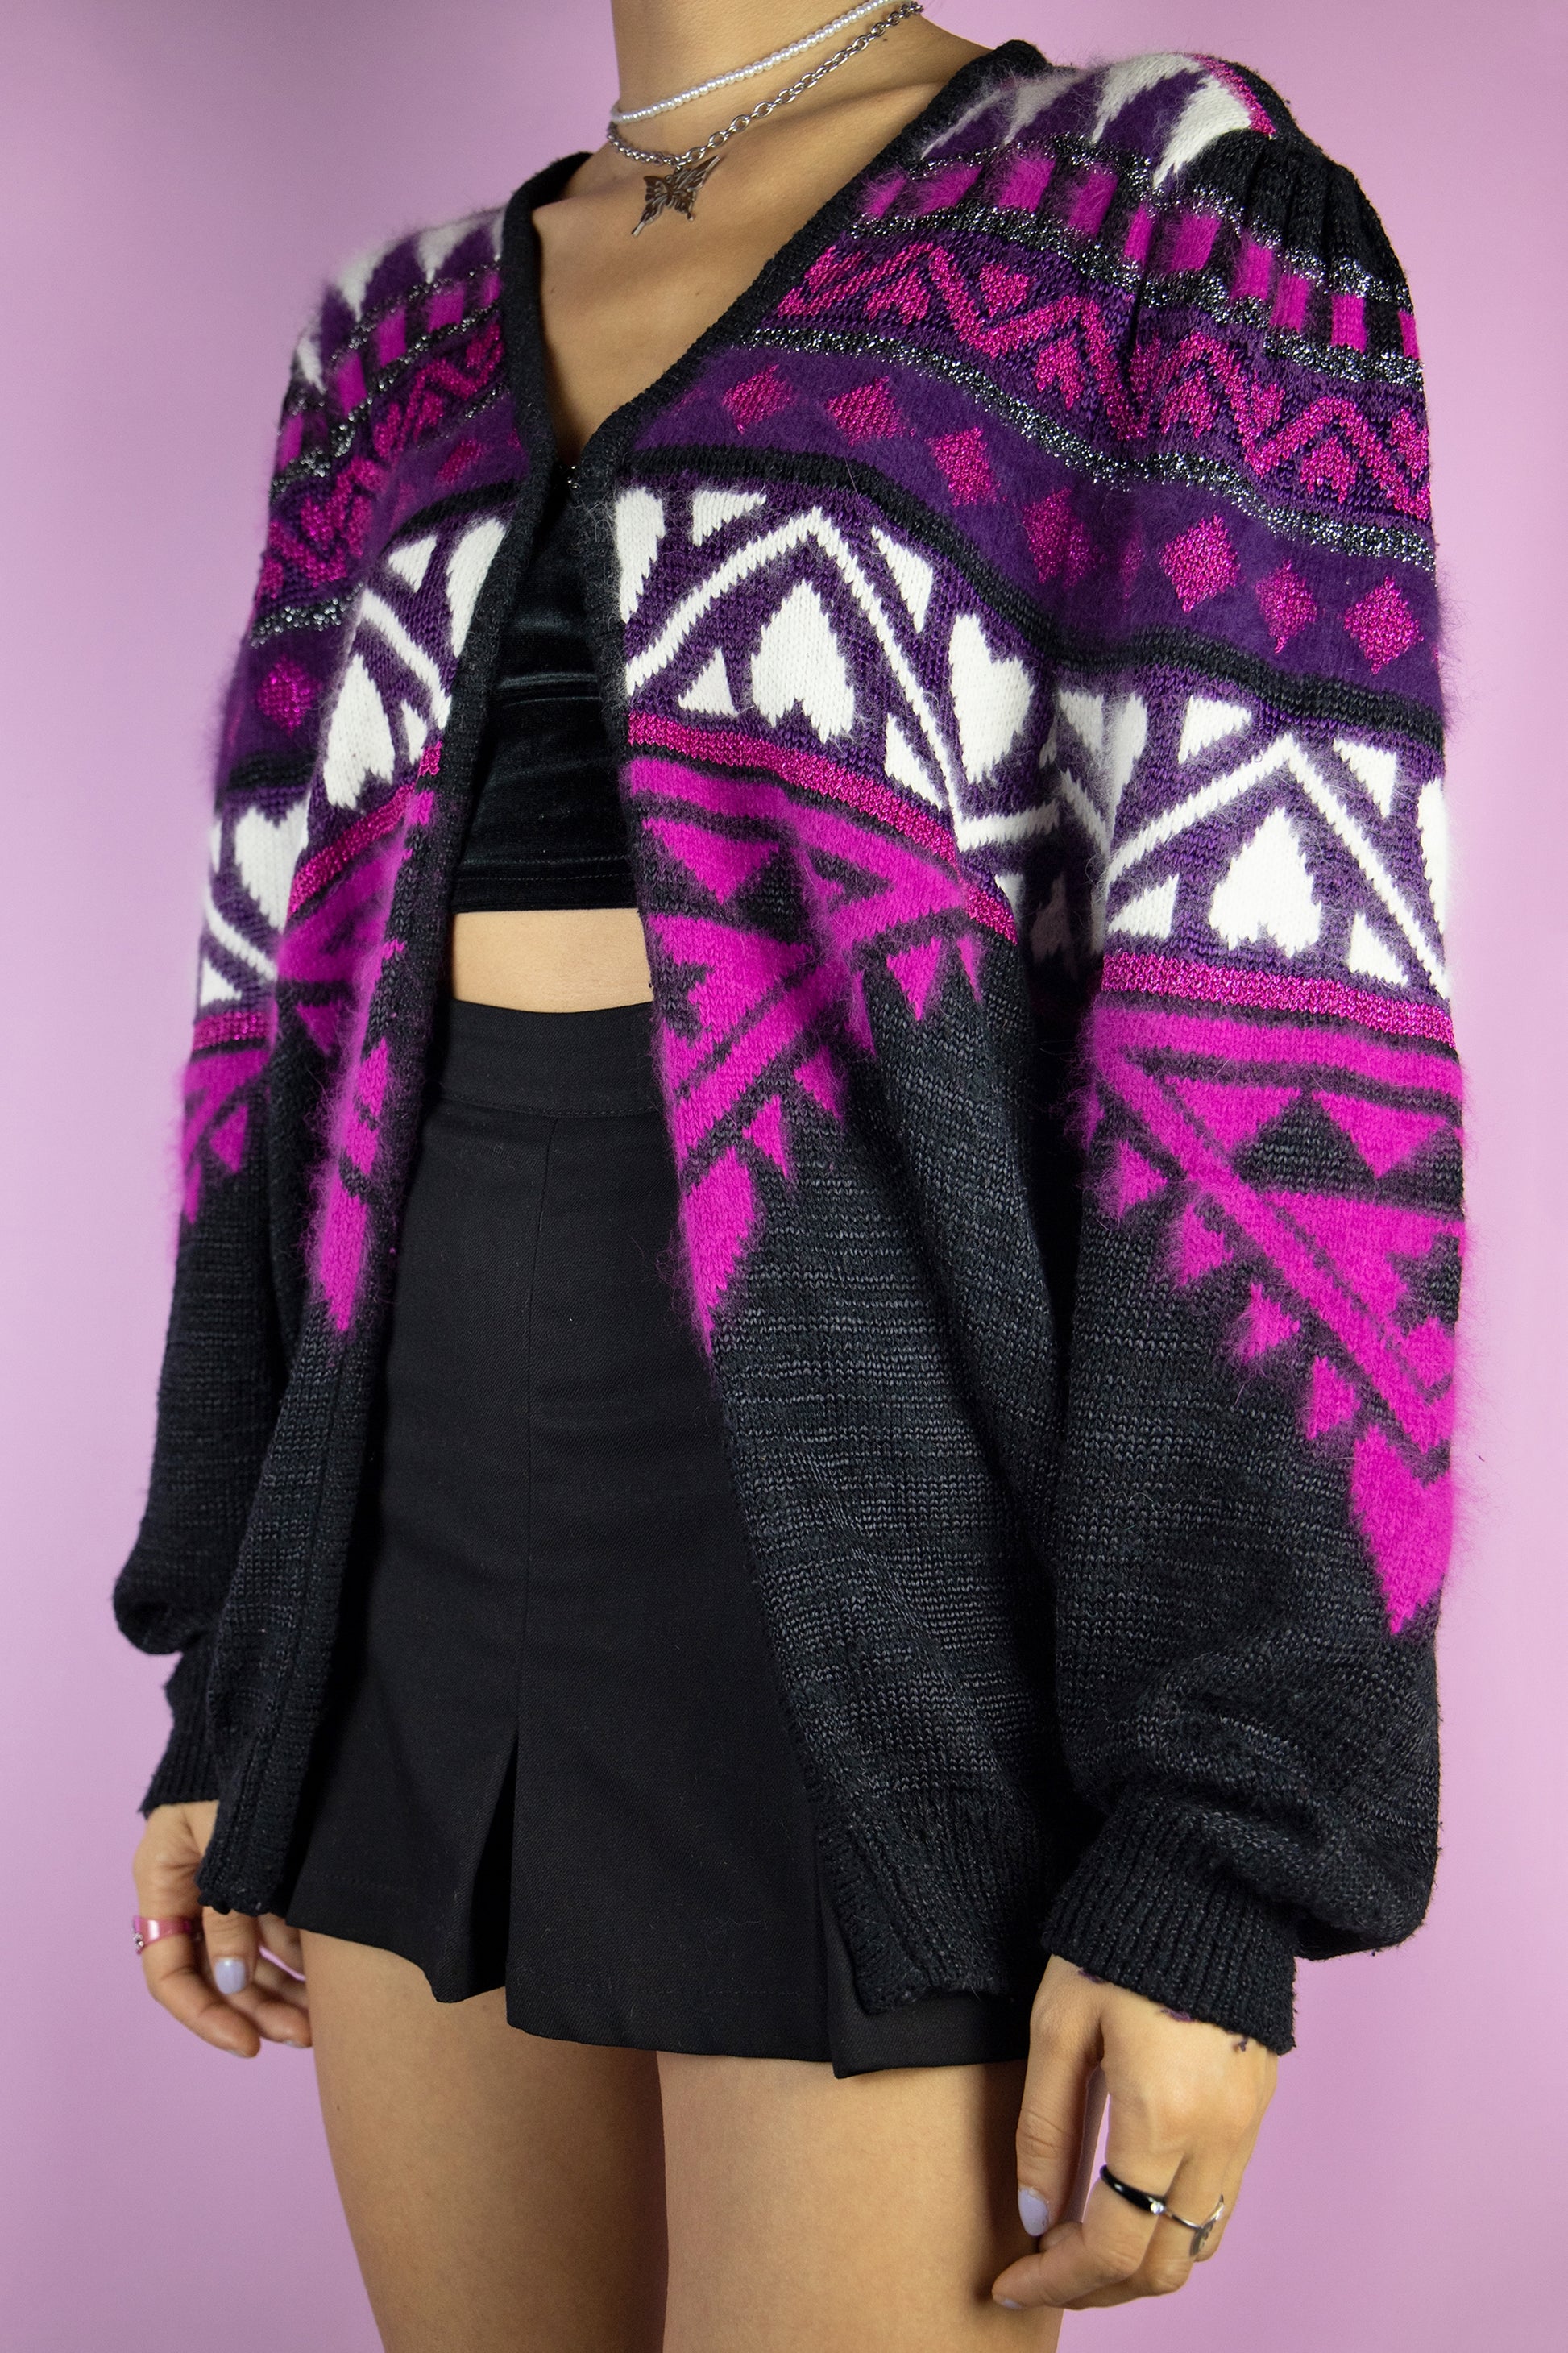 The Vintage 90s Black Puff Sleeve Cardigan is a black cardigan with purple, fuchsia and white abstract geometric pattern with puff sleeves and front hook closure. Looks cute when worn oversized. Lovely classic 1990s retro preppy style knit sweater.